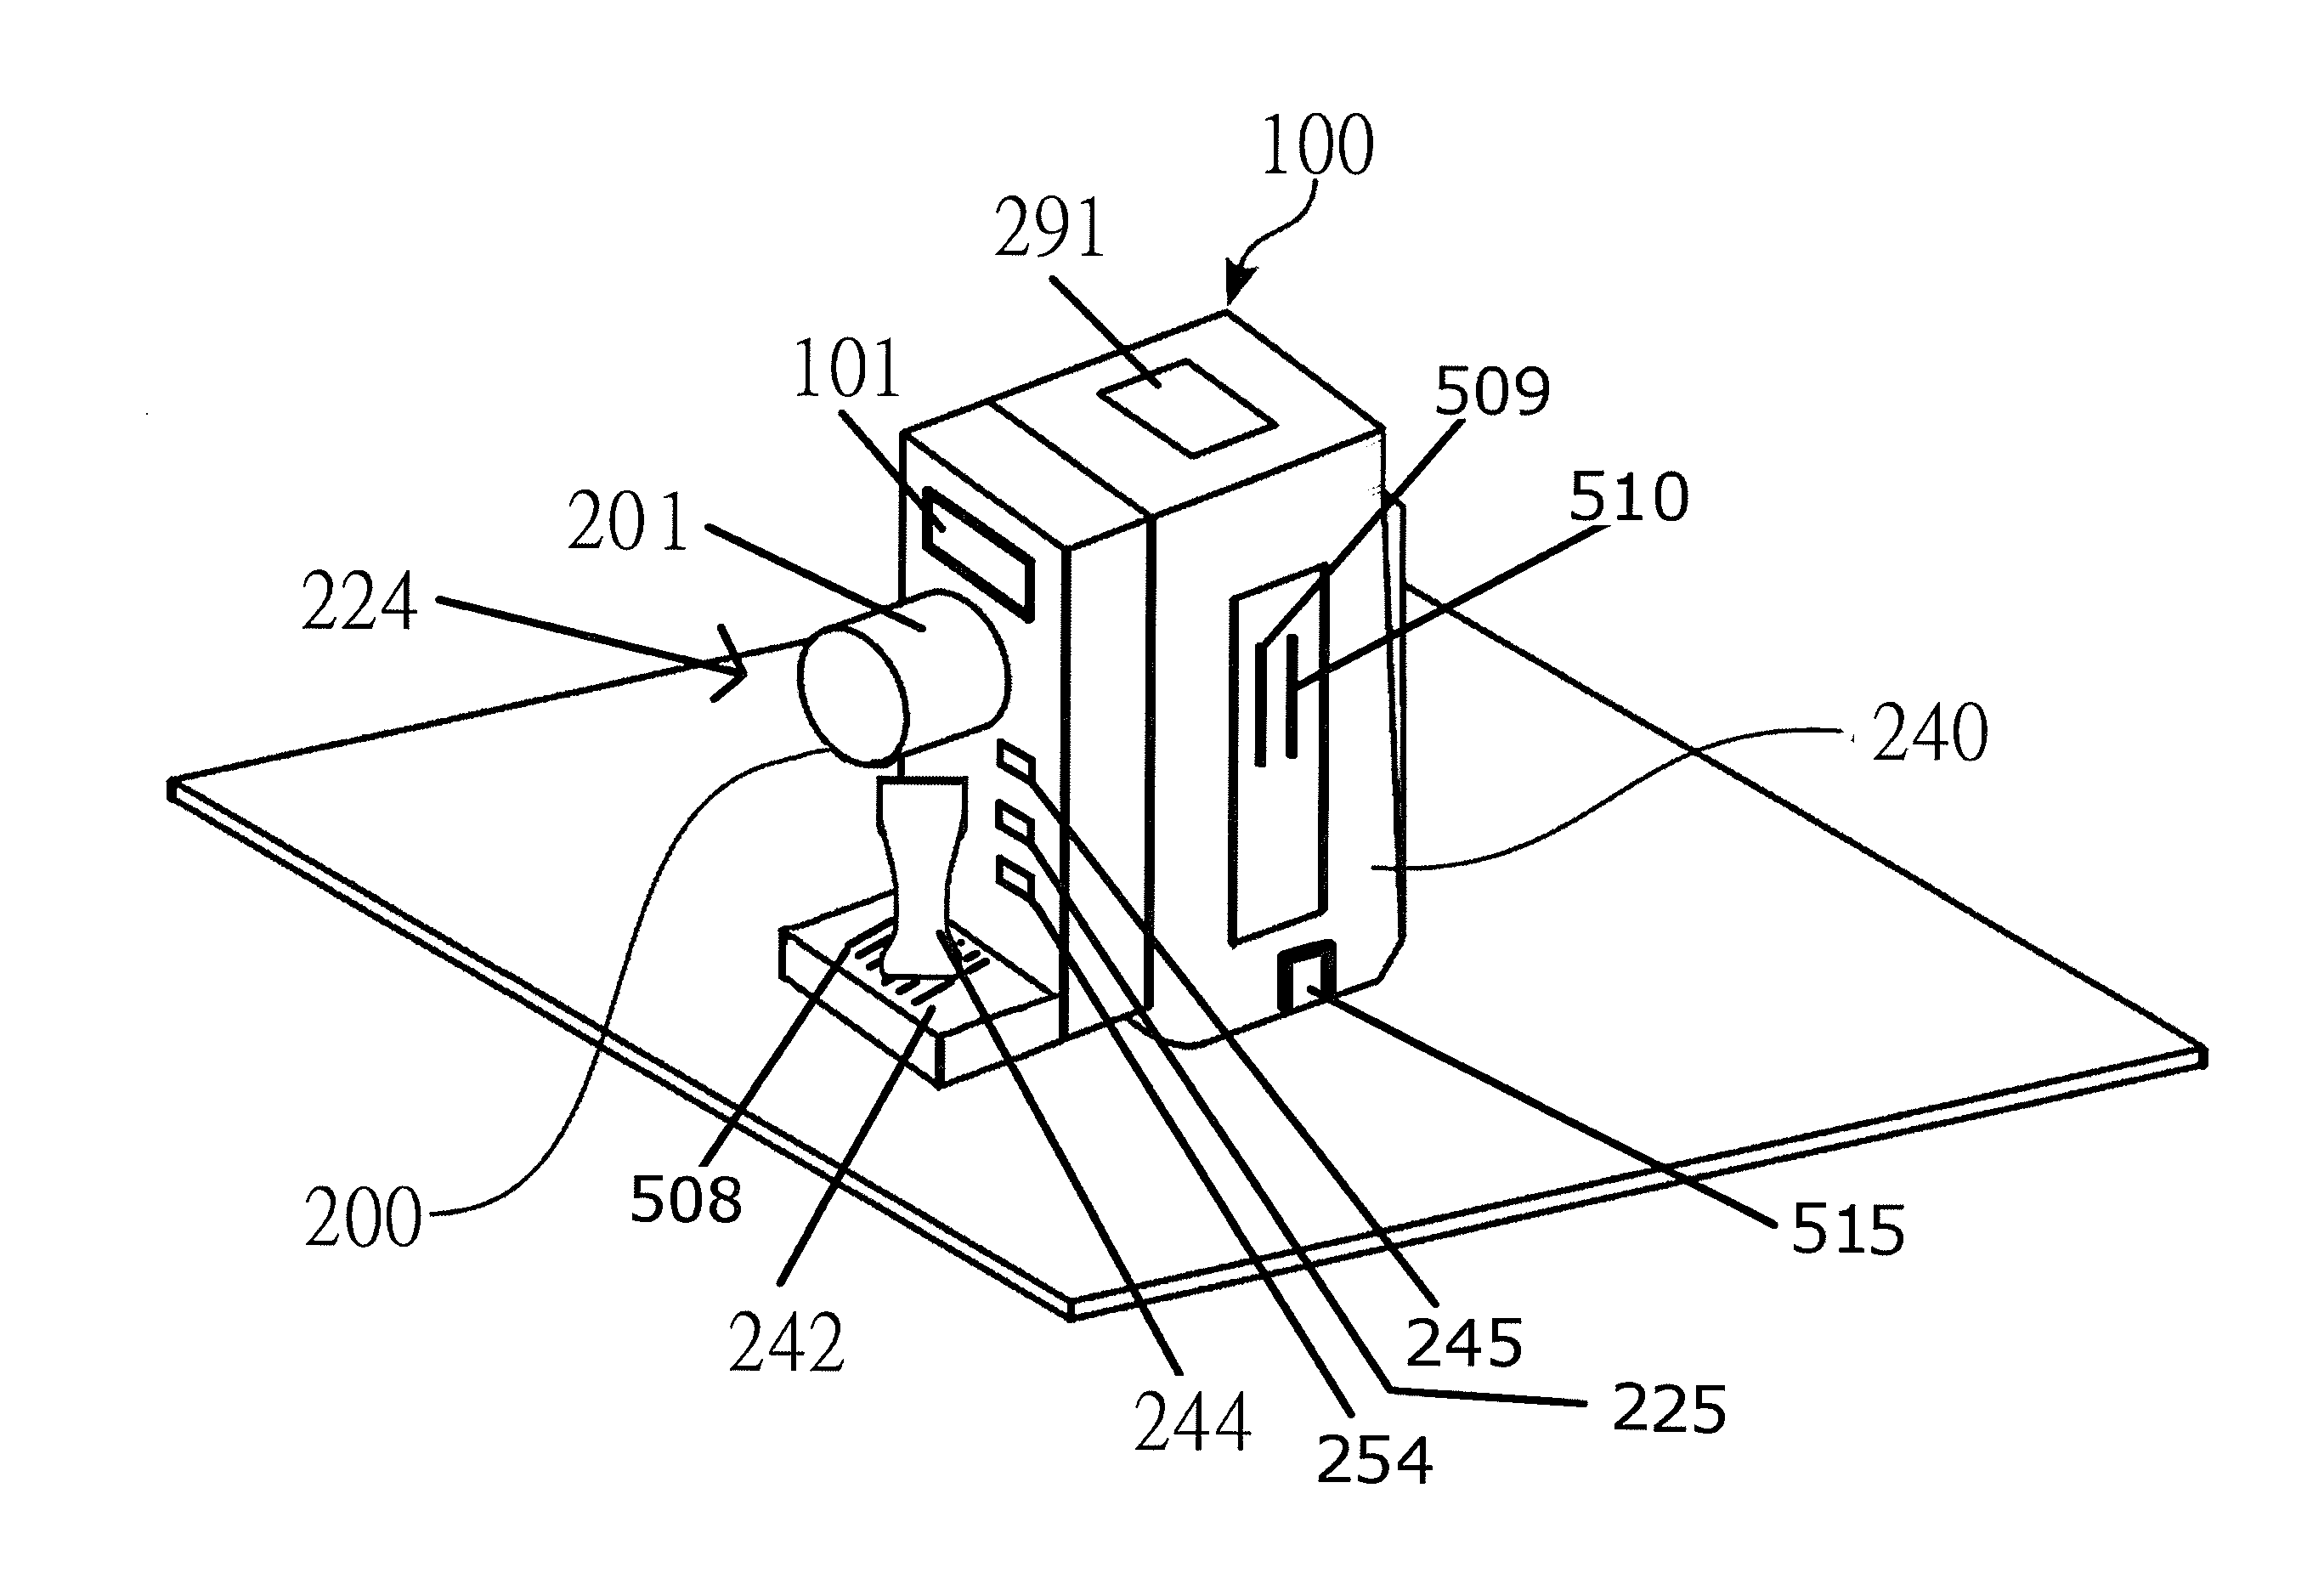 Capsule-based alcoholic beverage forming apparatus and components thereof